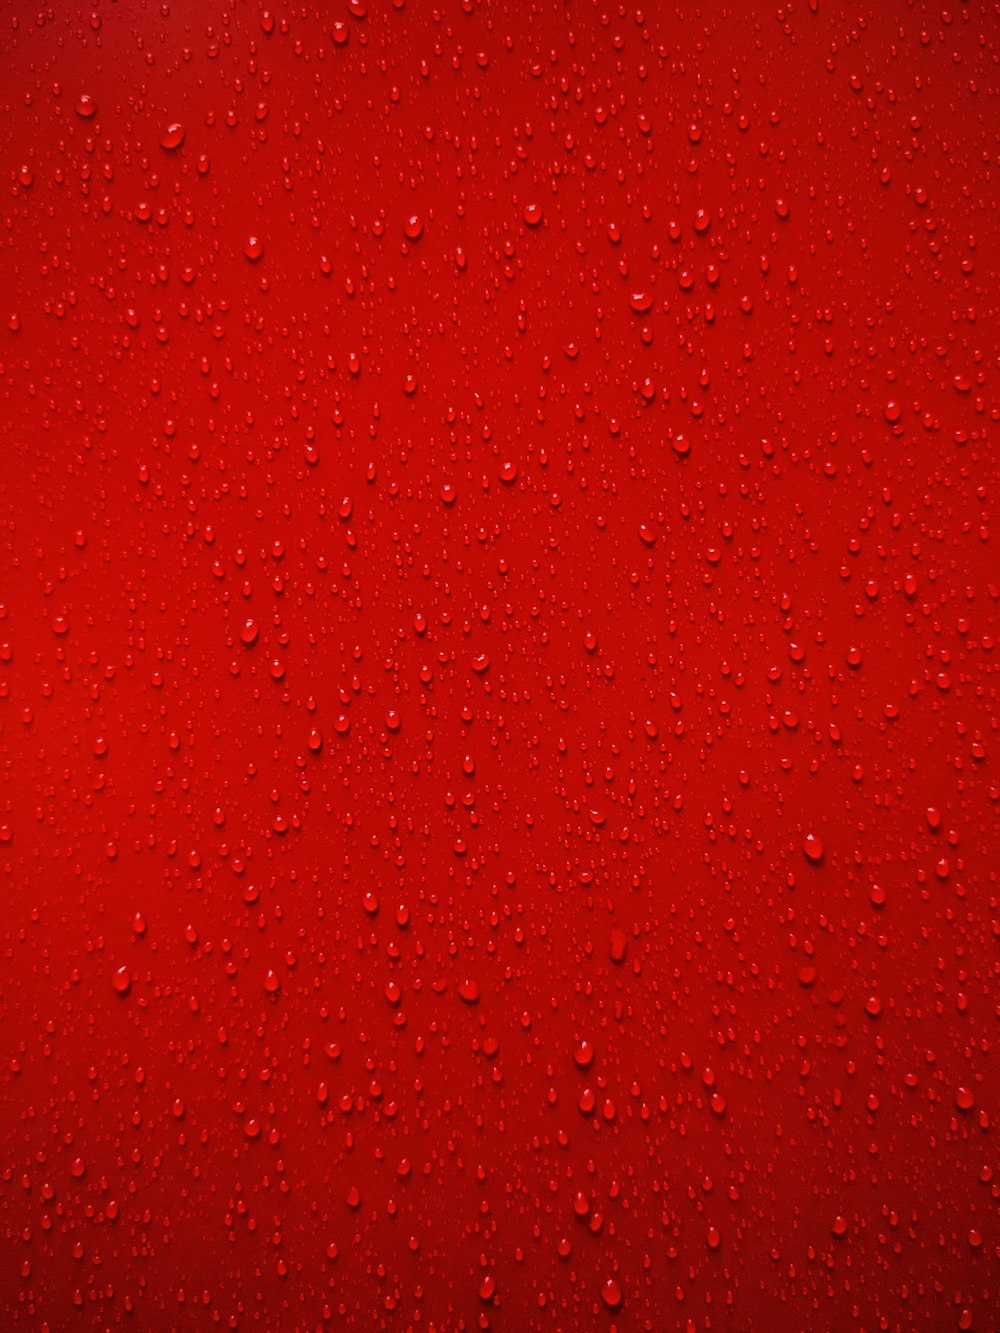 Red Cloth Background Image Backgrounds